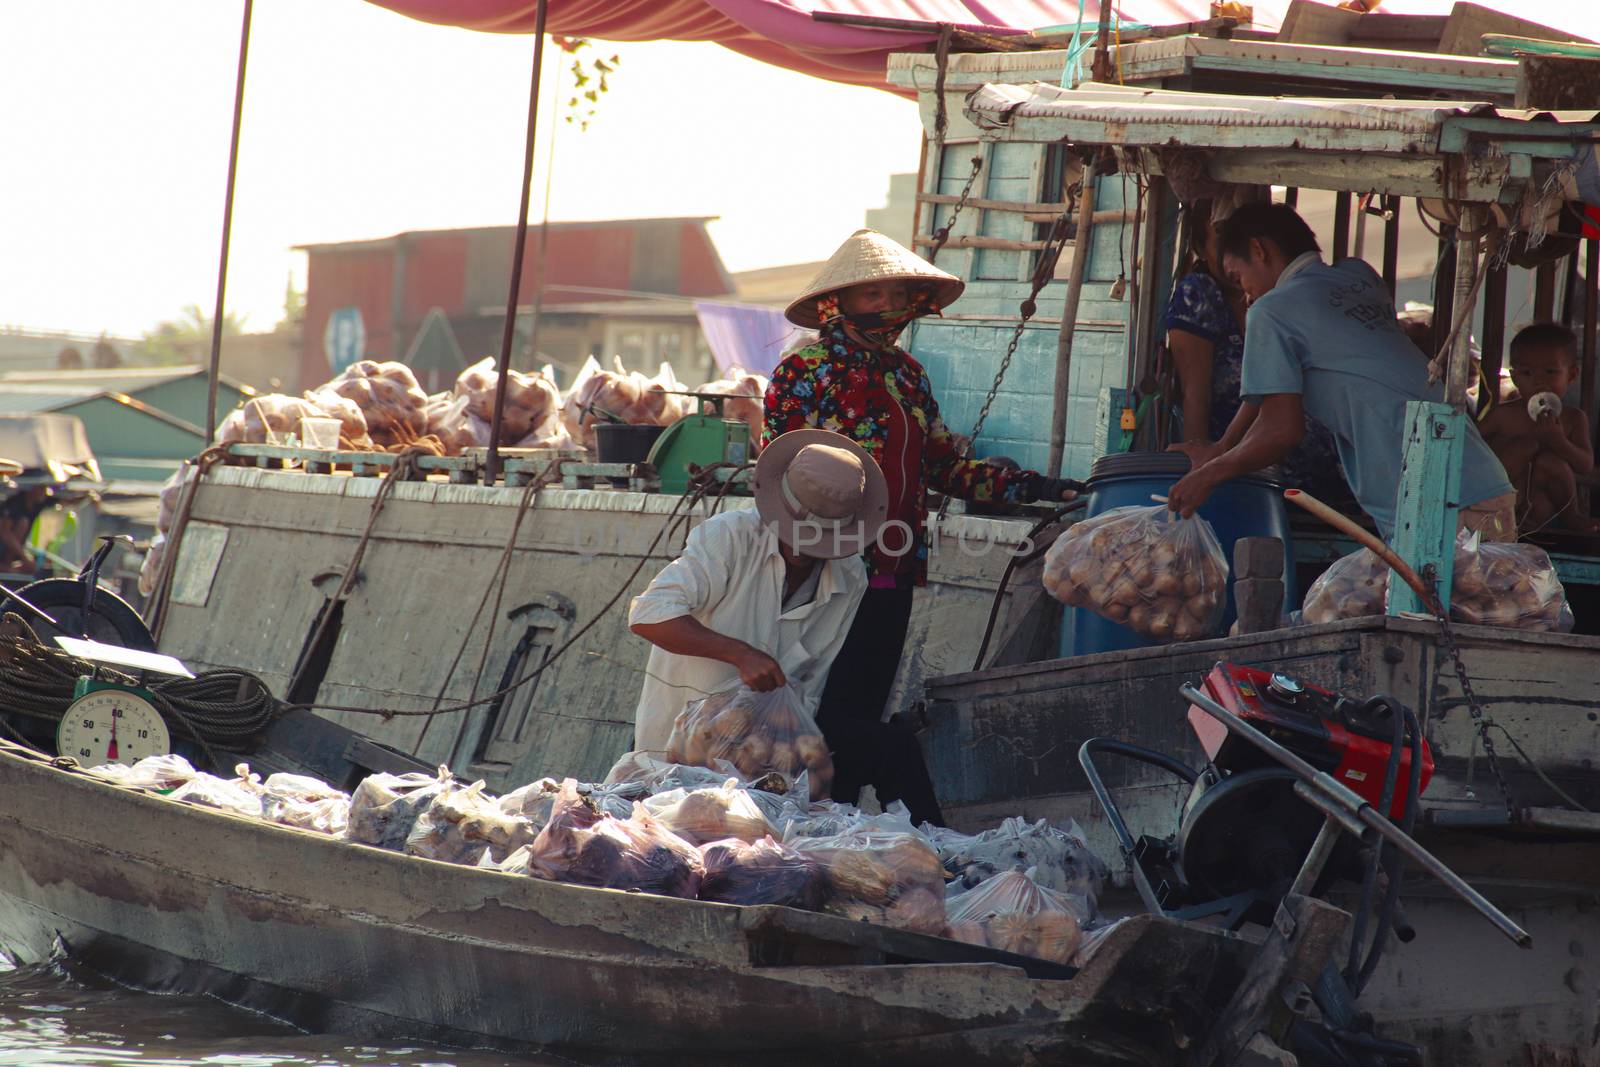 Editorial. Merchants selling fresh produce in Cai Rang Floating Market in Can tho, Vietnam